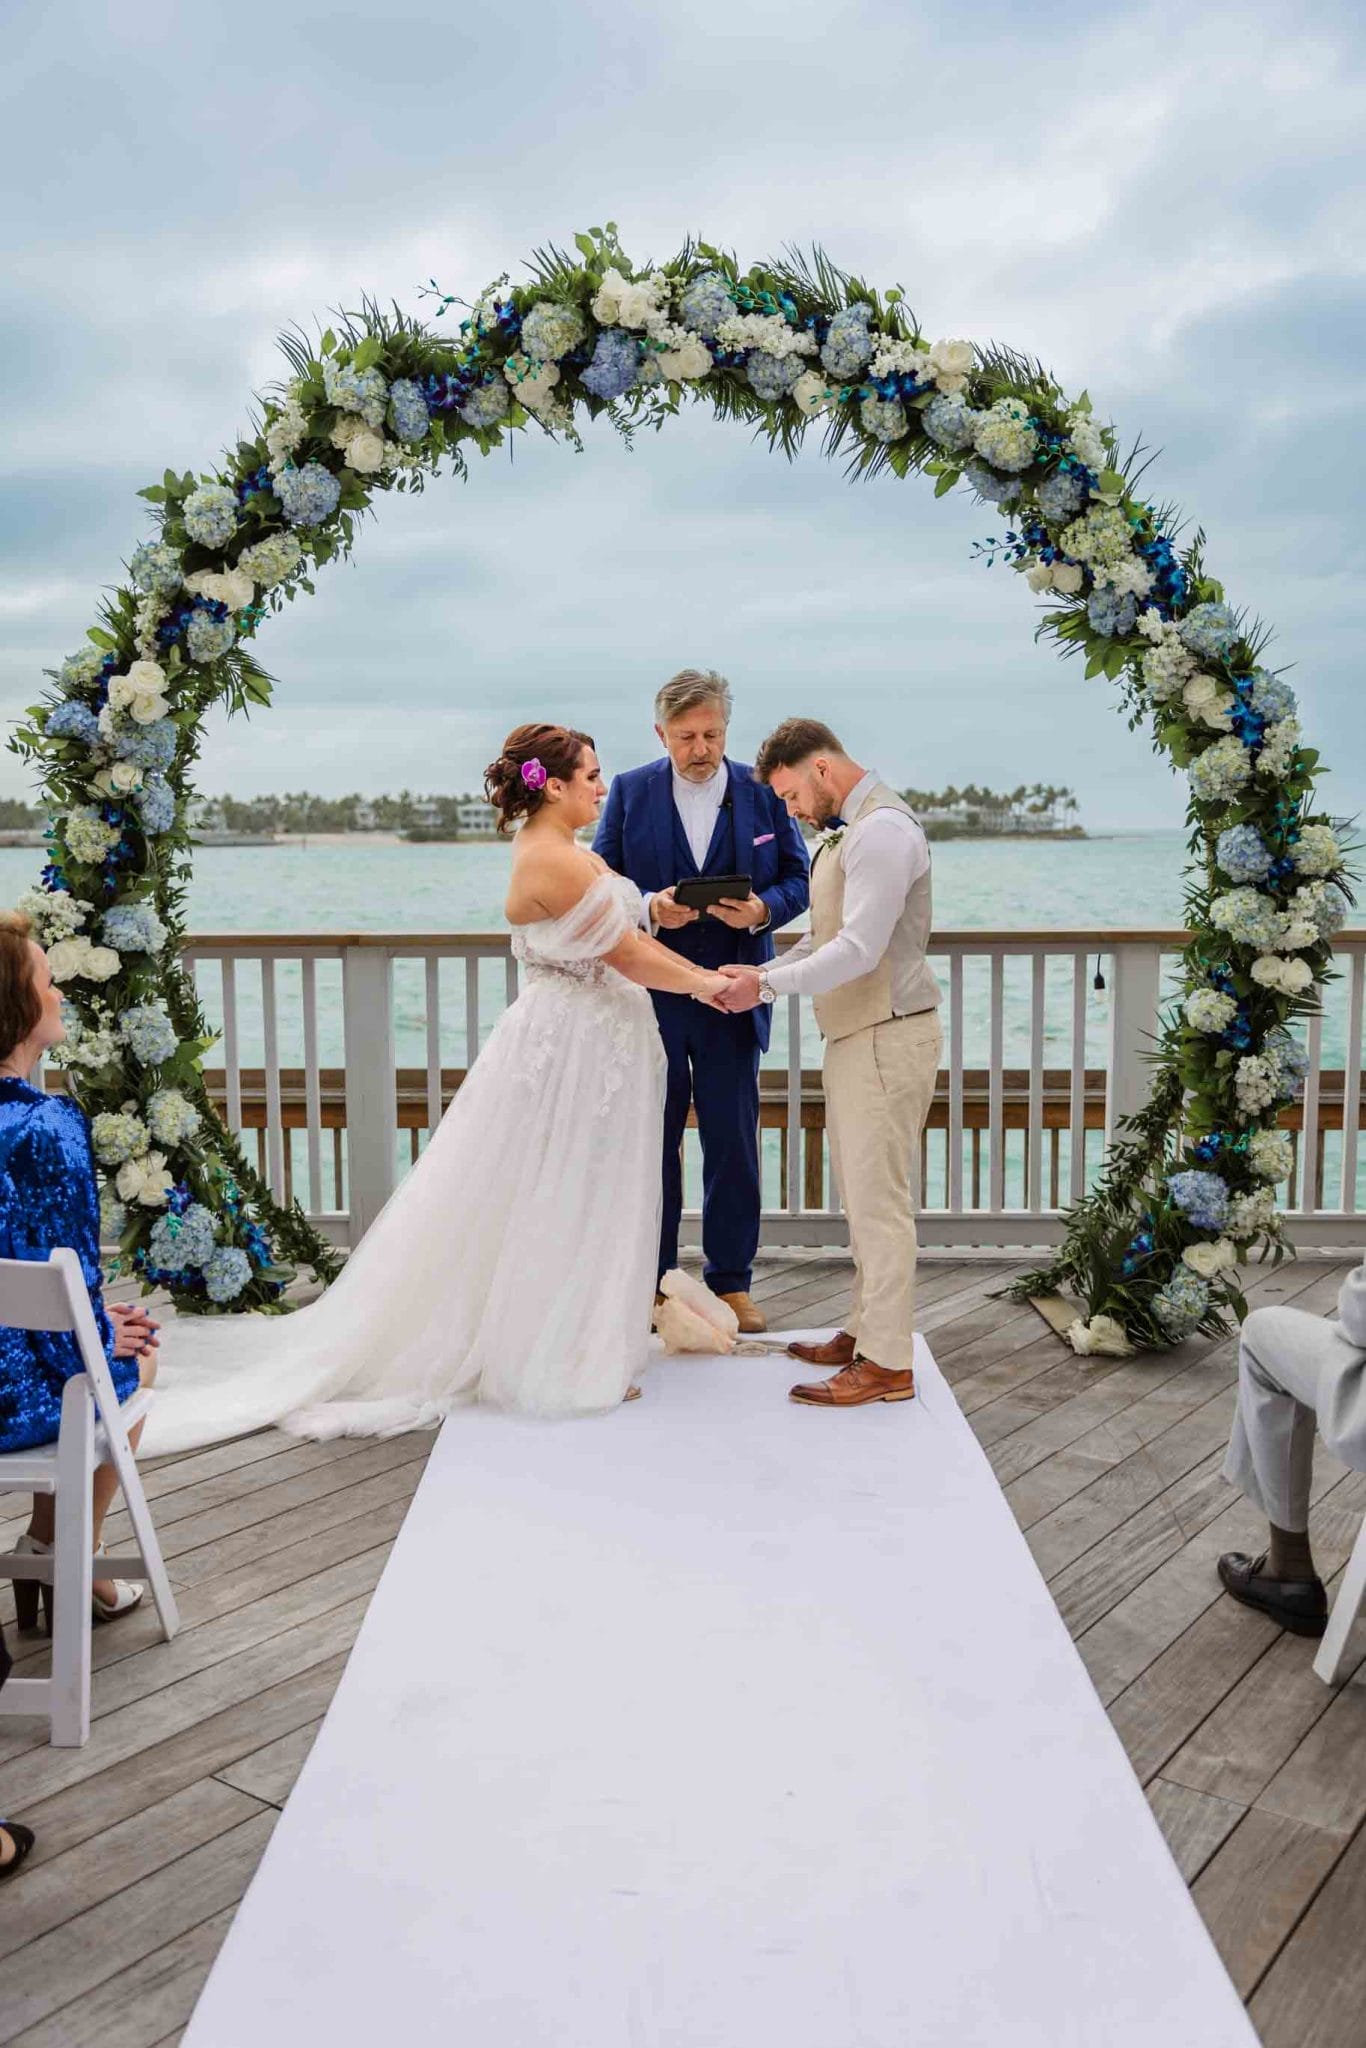 A bride and groom exchange rings at an outdoor wedding ceremony by the sea, under a floral archway, with an officiant and guests seated nearby.